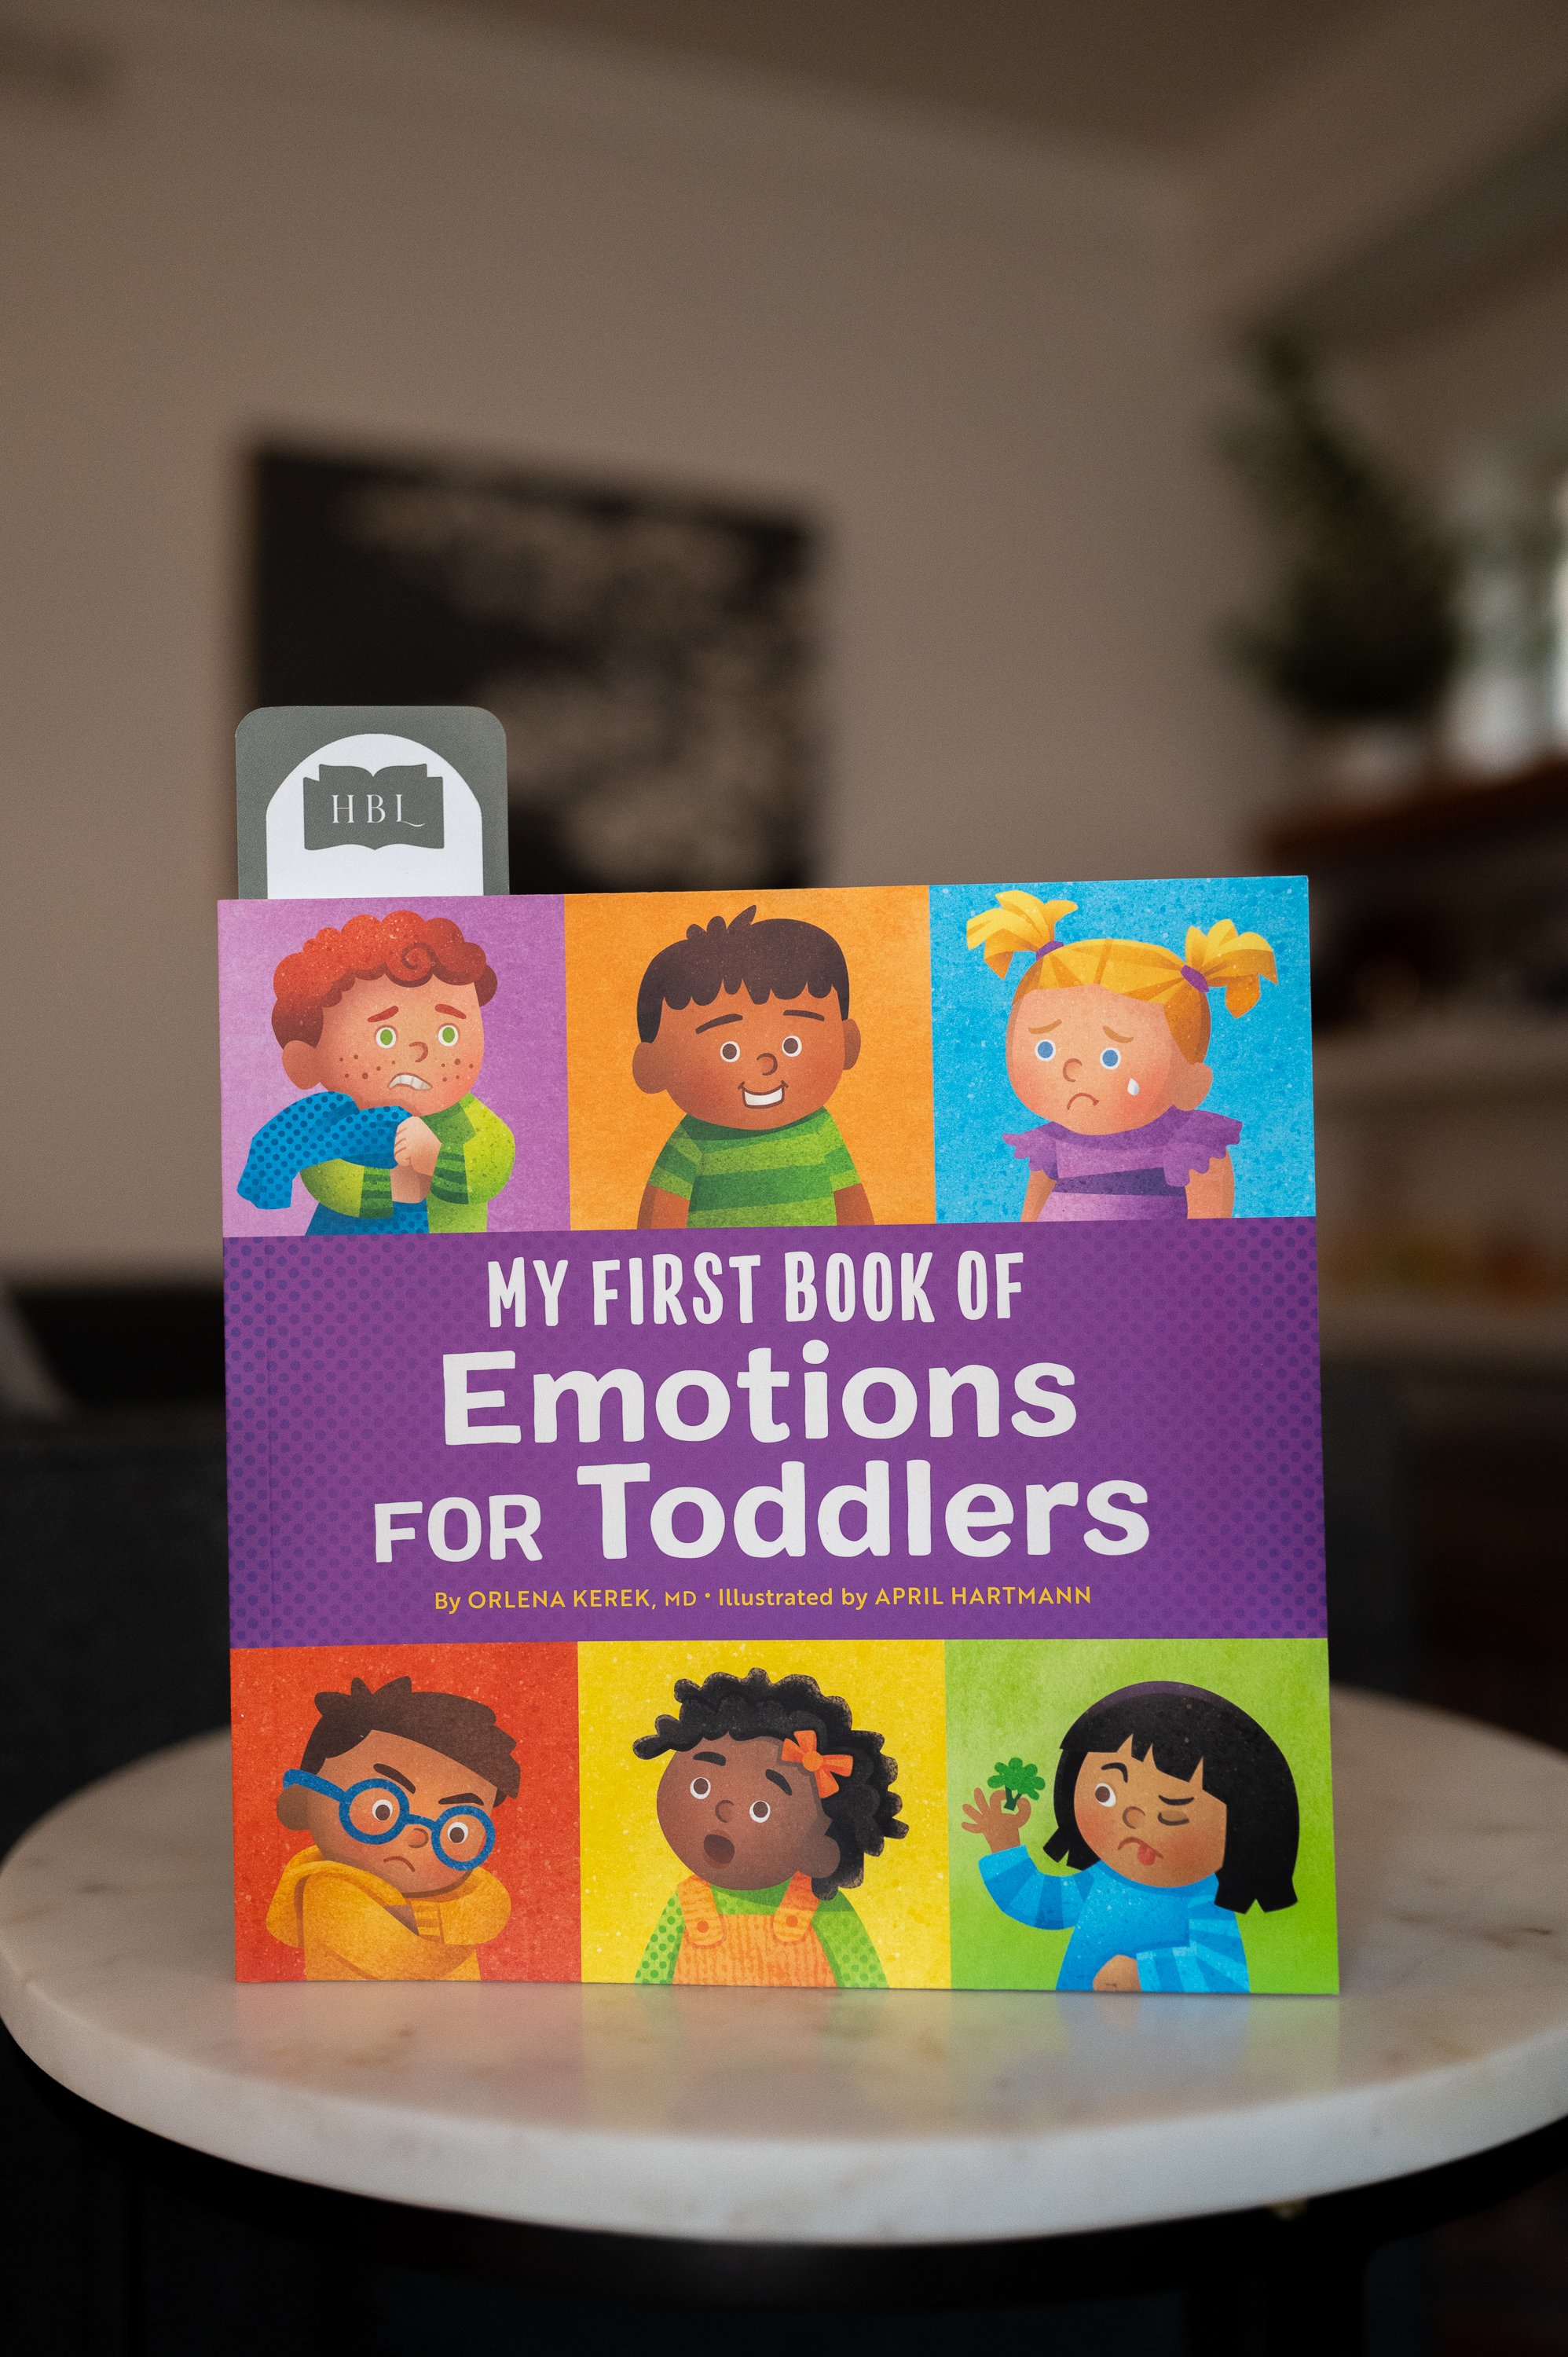 My First Book of Emotions for Toddlers by Orlena Kerek.jpg